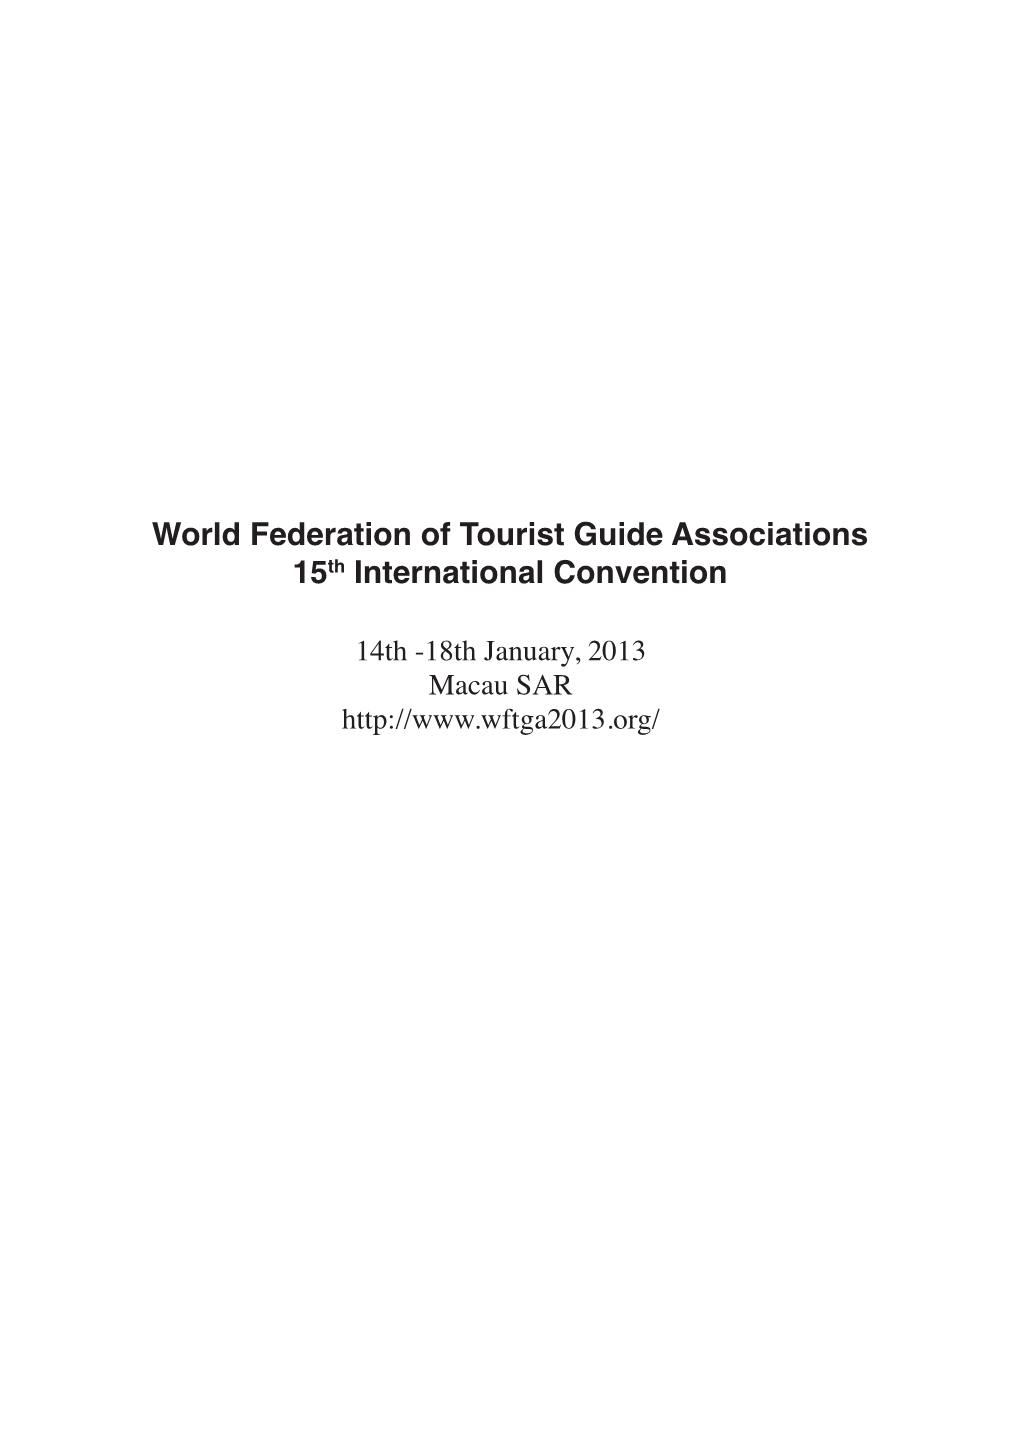 World Federation of Tourist Guide Associations 15Th International Convention